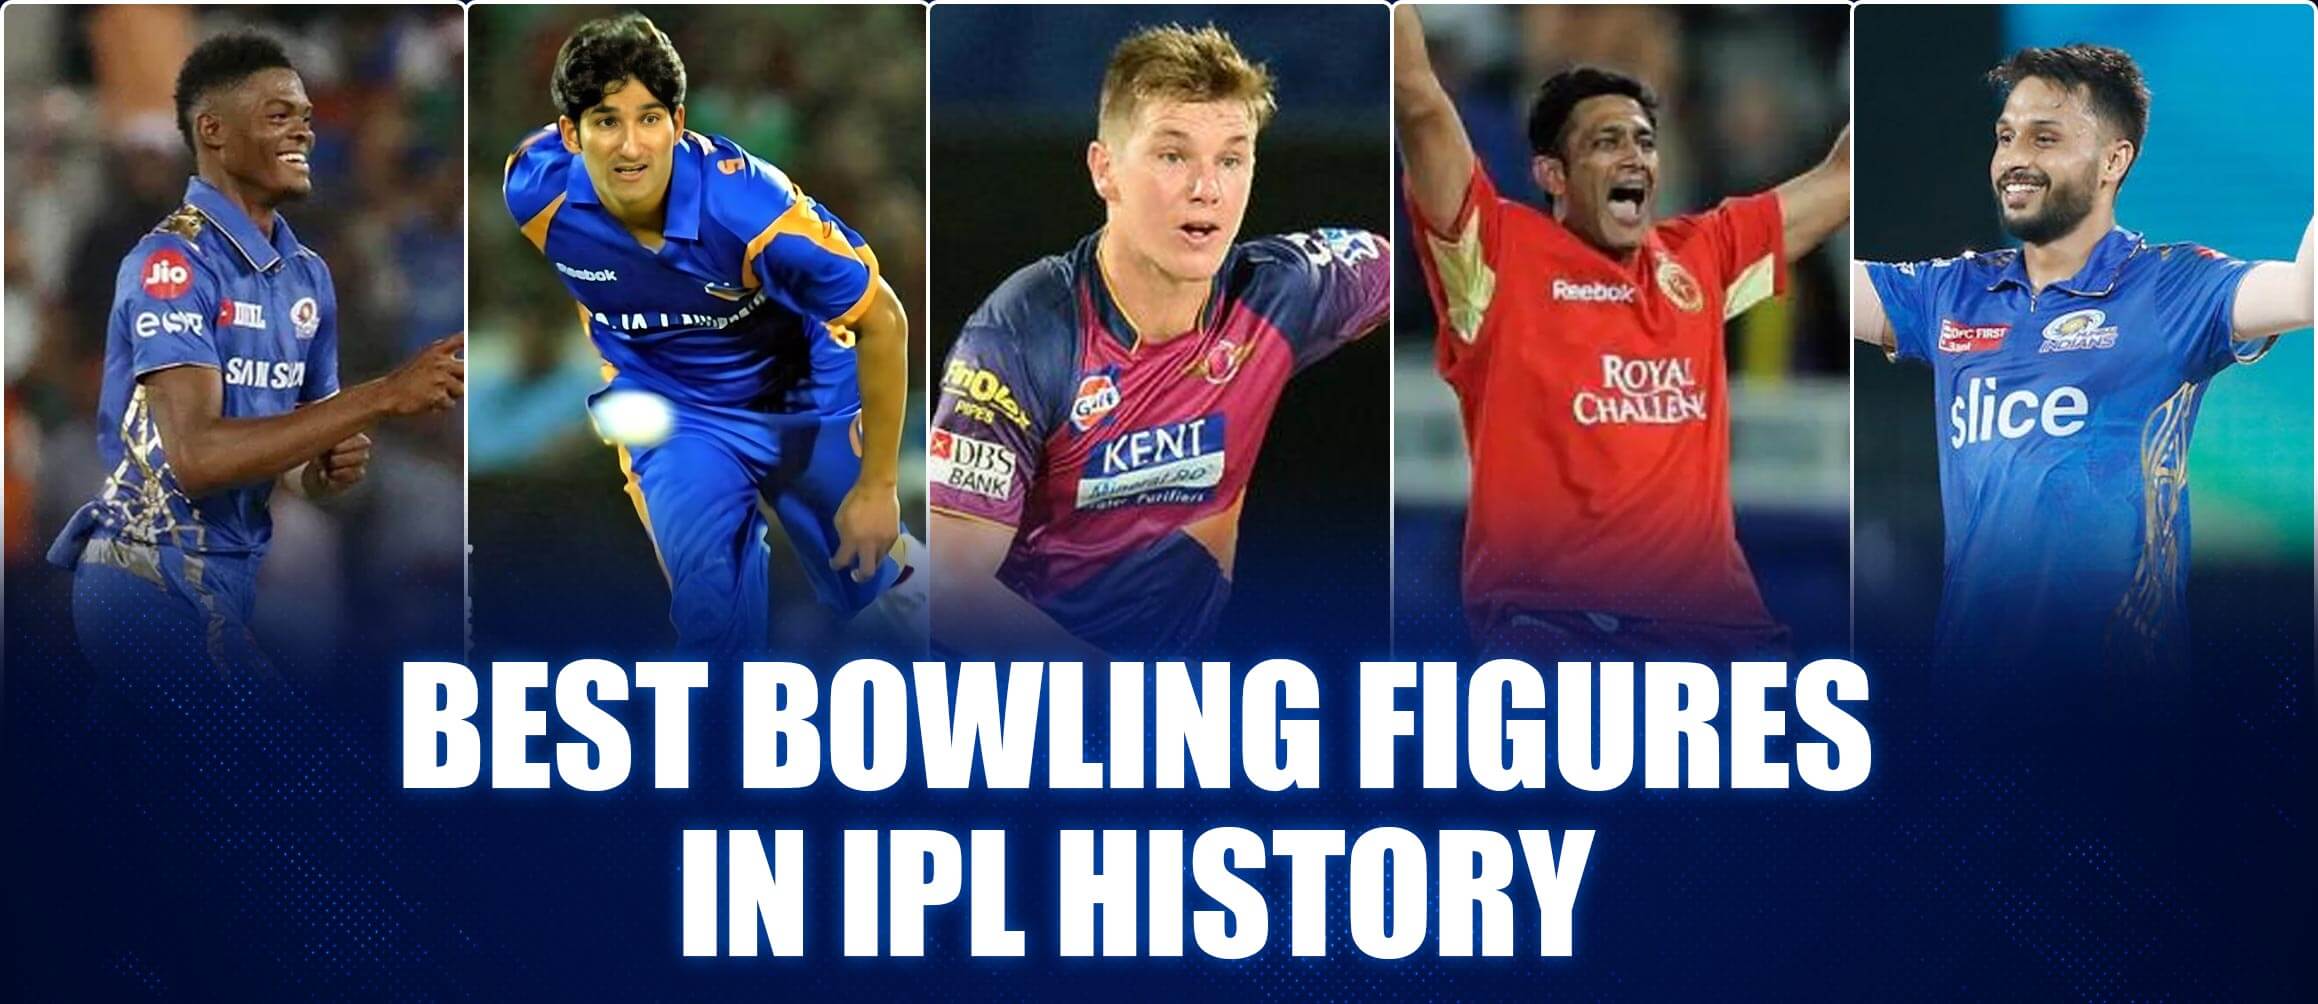 Best Bowling Figures in IPL History